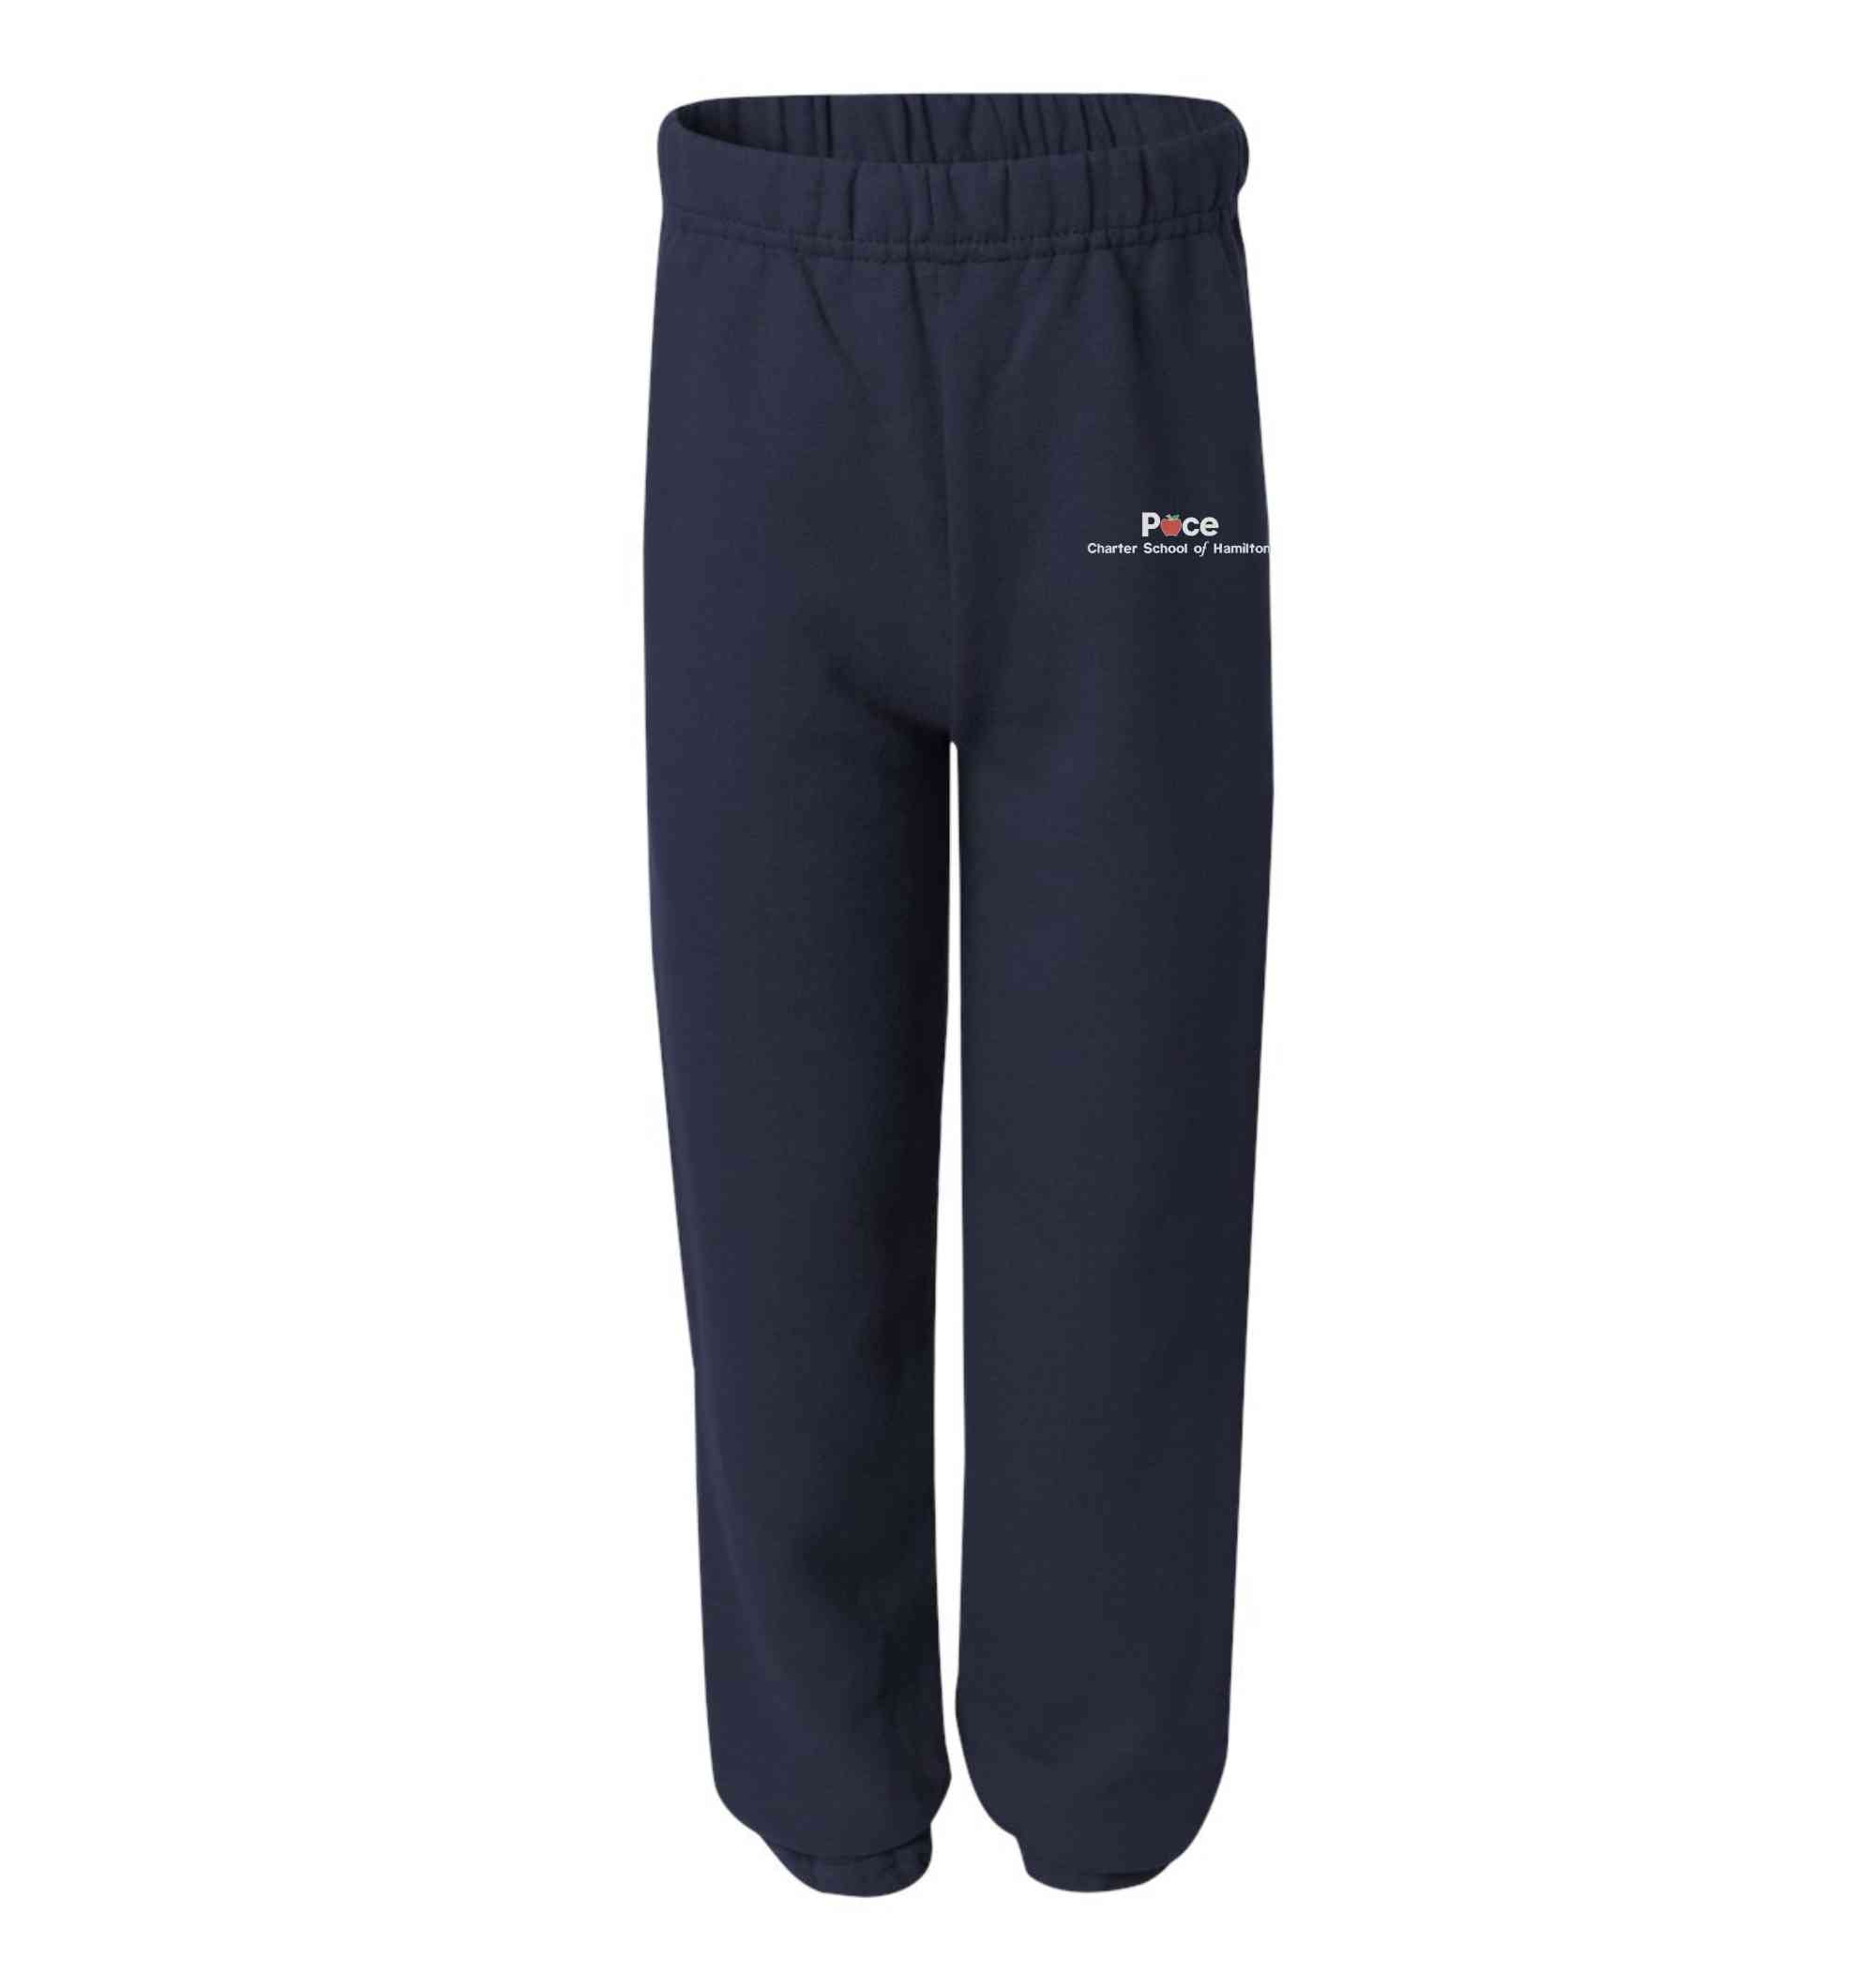 3-973BR Gym Uniform -Embroidered Unisex Youth Sweatpants